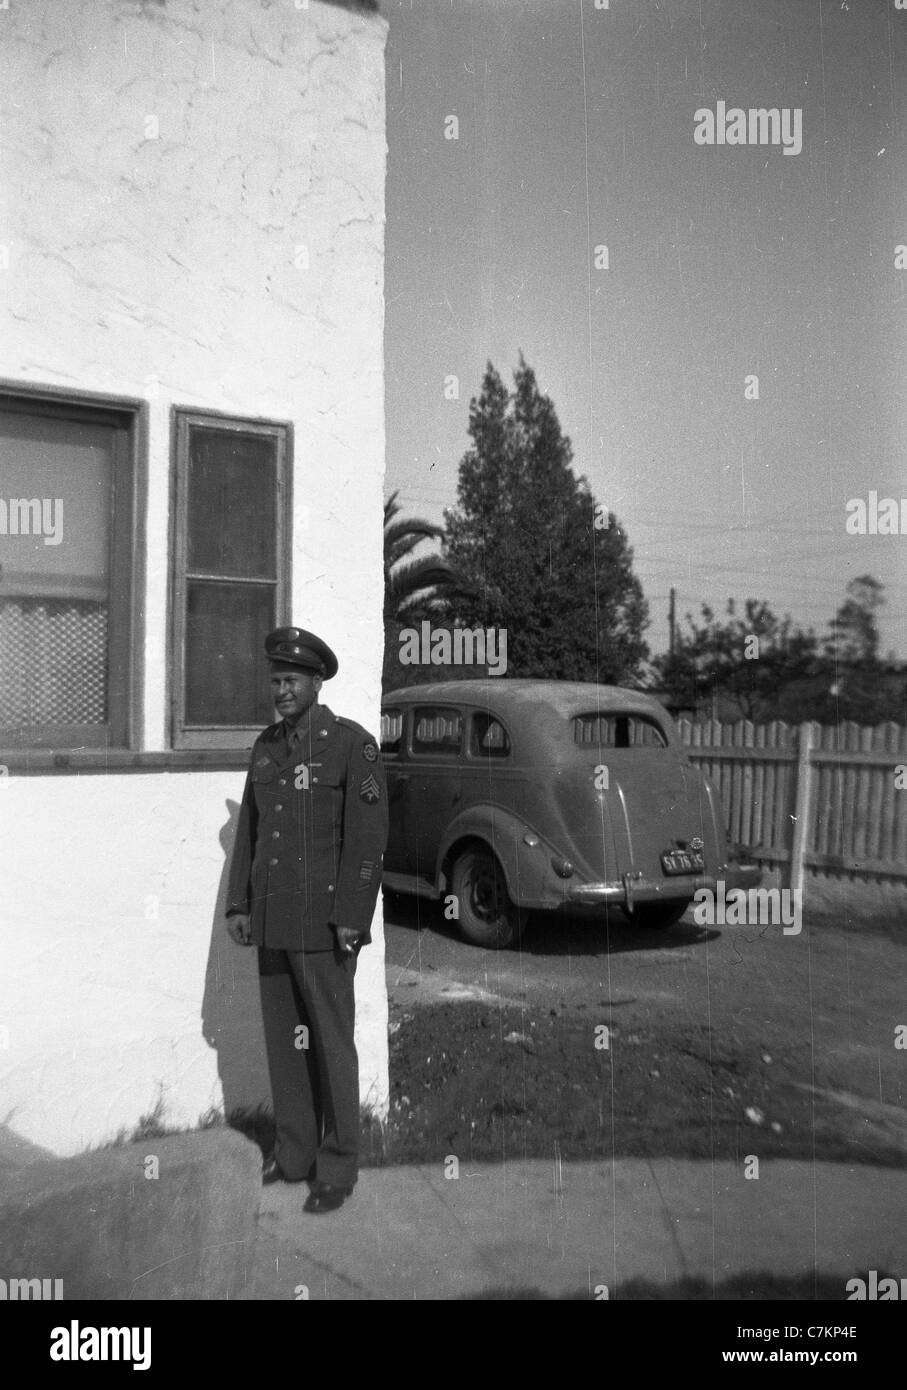 USA tech sargeant wwii car sgt male soldier military portrait outside house vertical Stock Photo